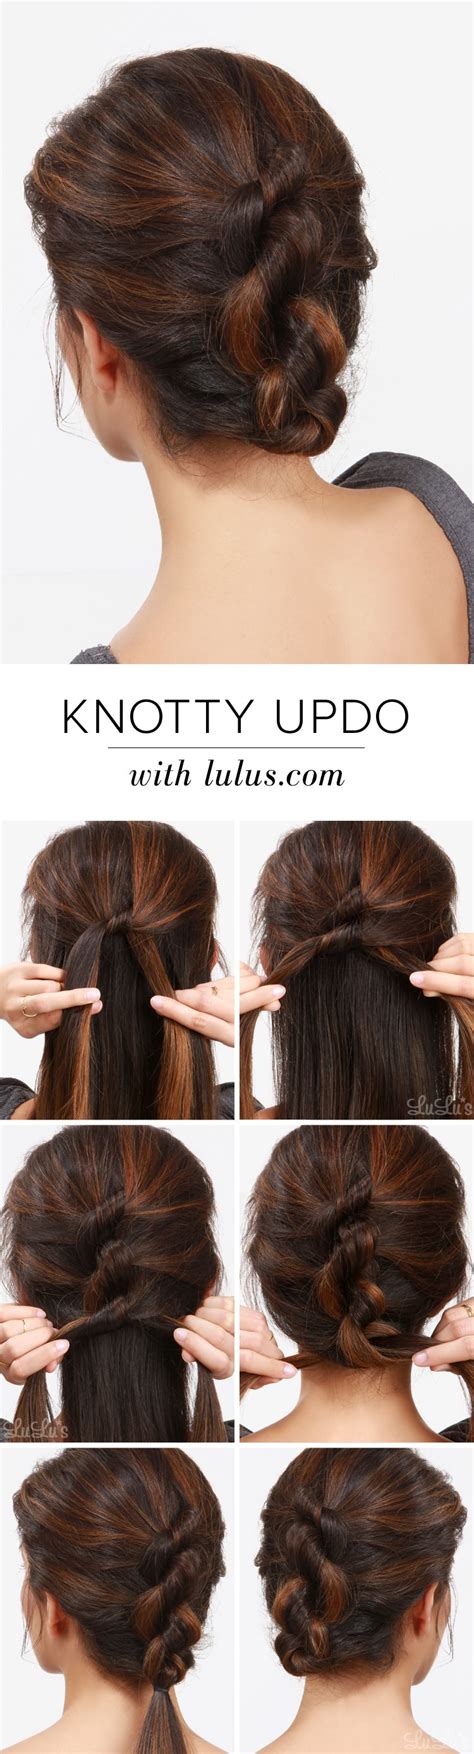 This easy scarf hairstyle for long hair. 20 Easy Hairstyle Tutorials for Your Everyday Look ...